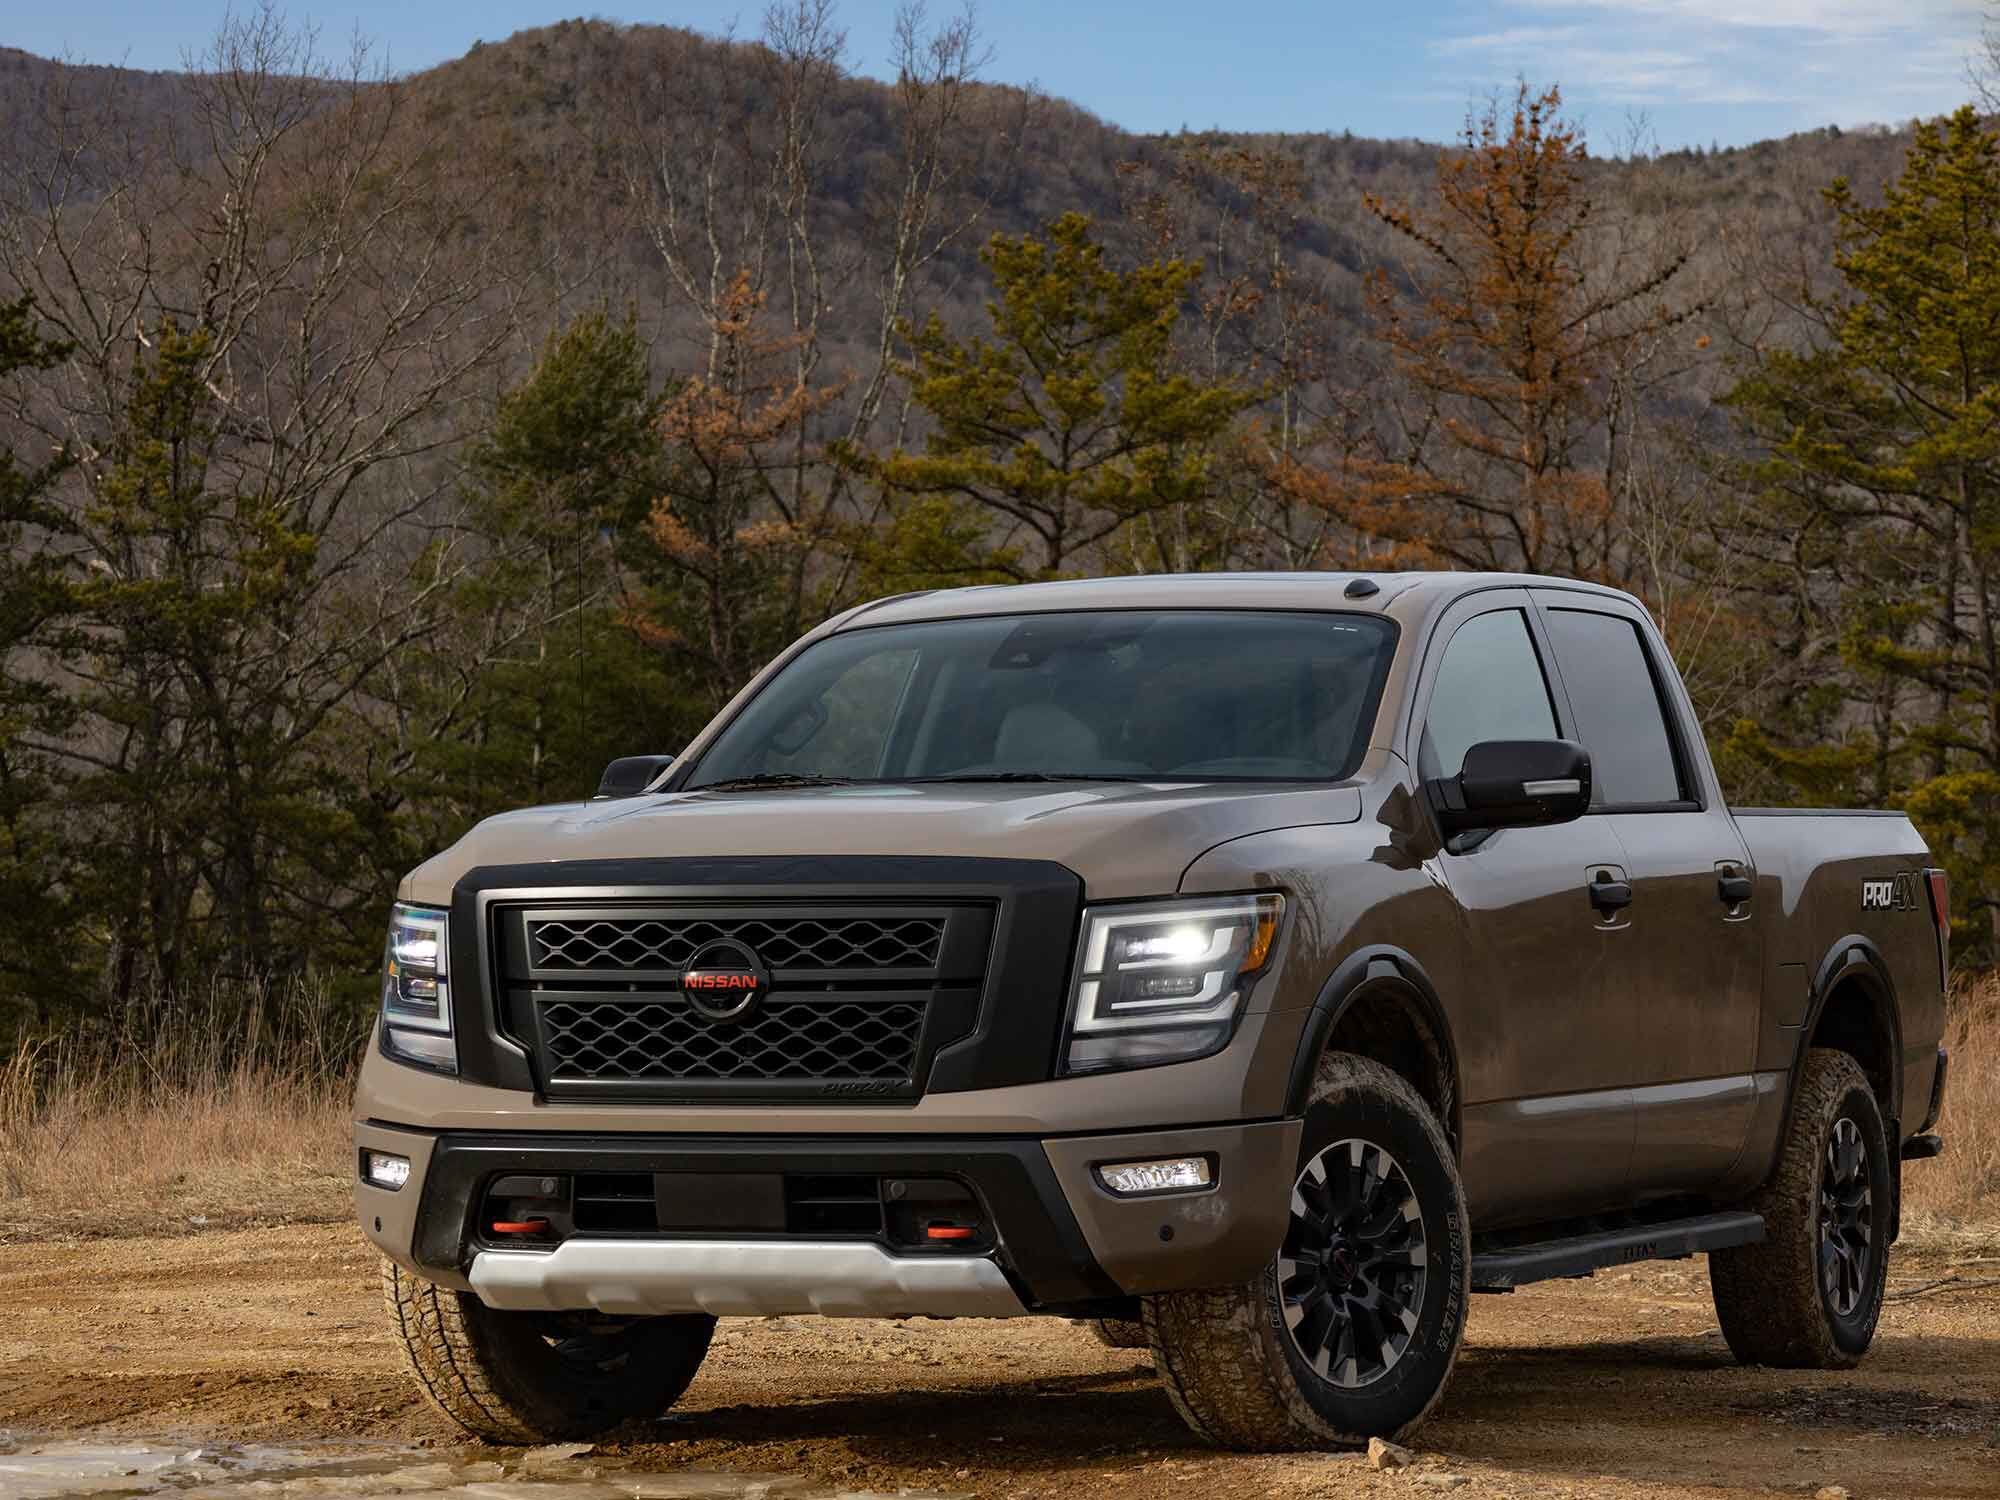 Our 2021 Nissan Titan Pro-4X long-termer continues to impress us with its towing ability, comfort, and all-around competence.